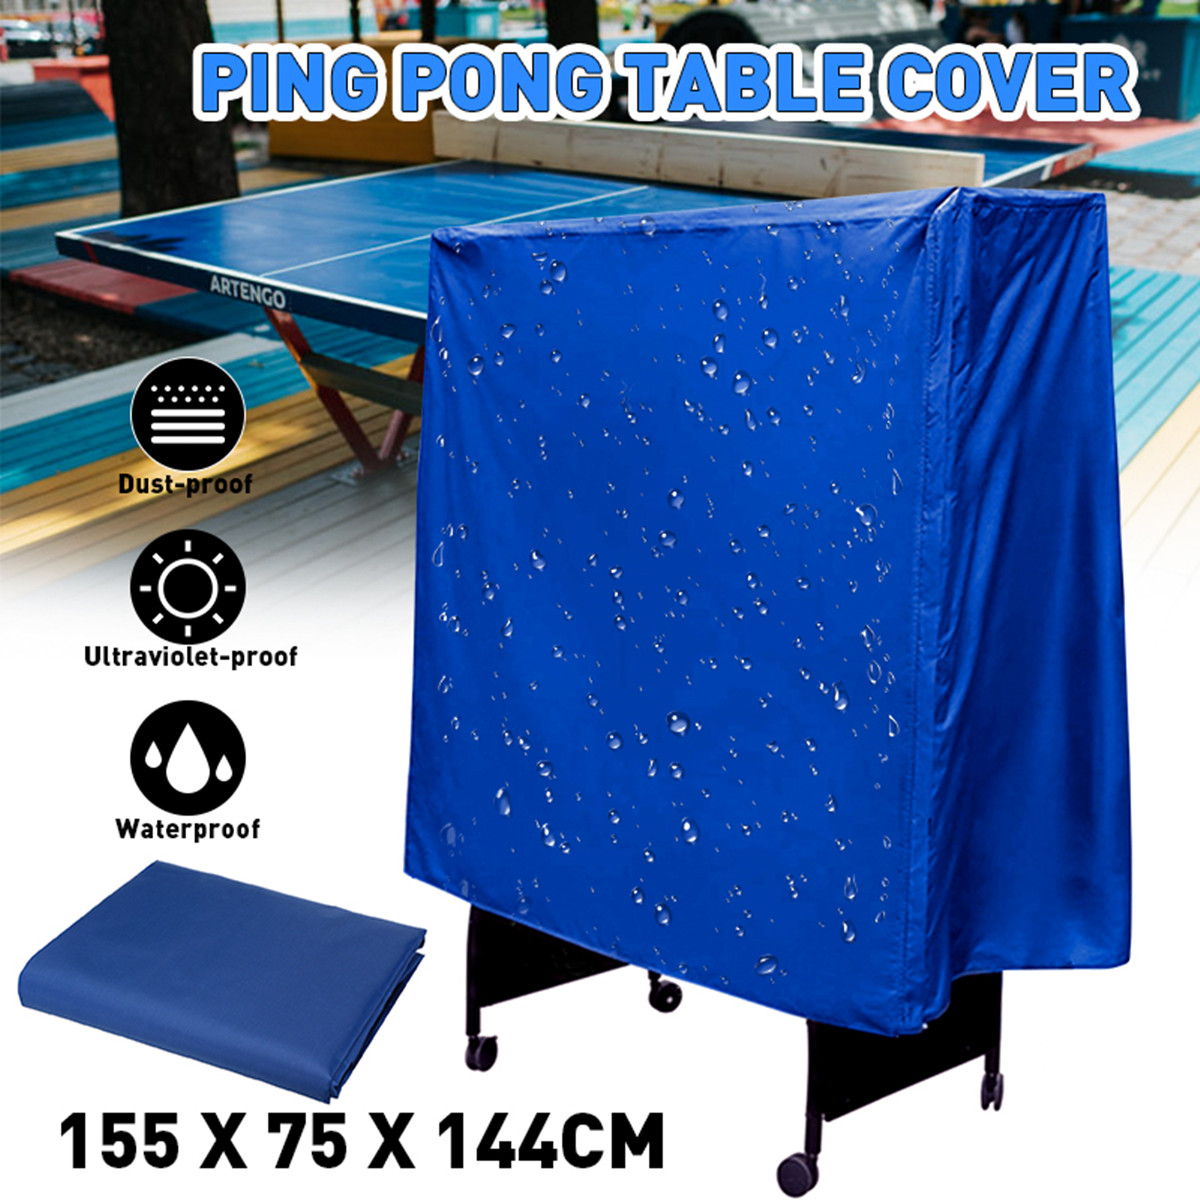 Waterproof Ping Pong Table Cover Storage Table Tennis Sheet Protector Cover 